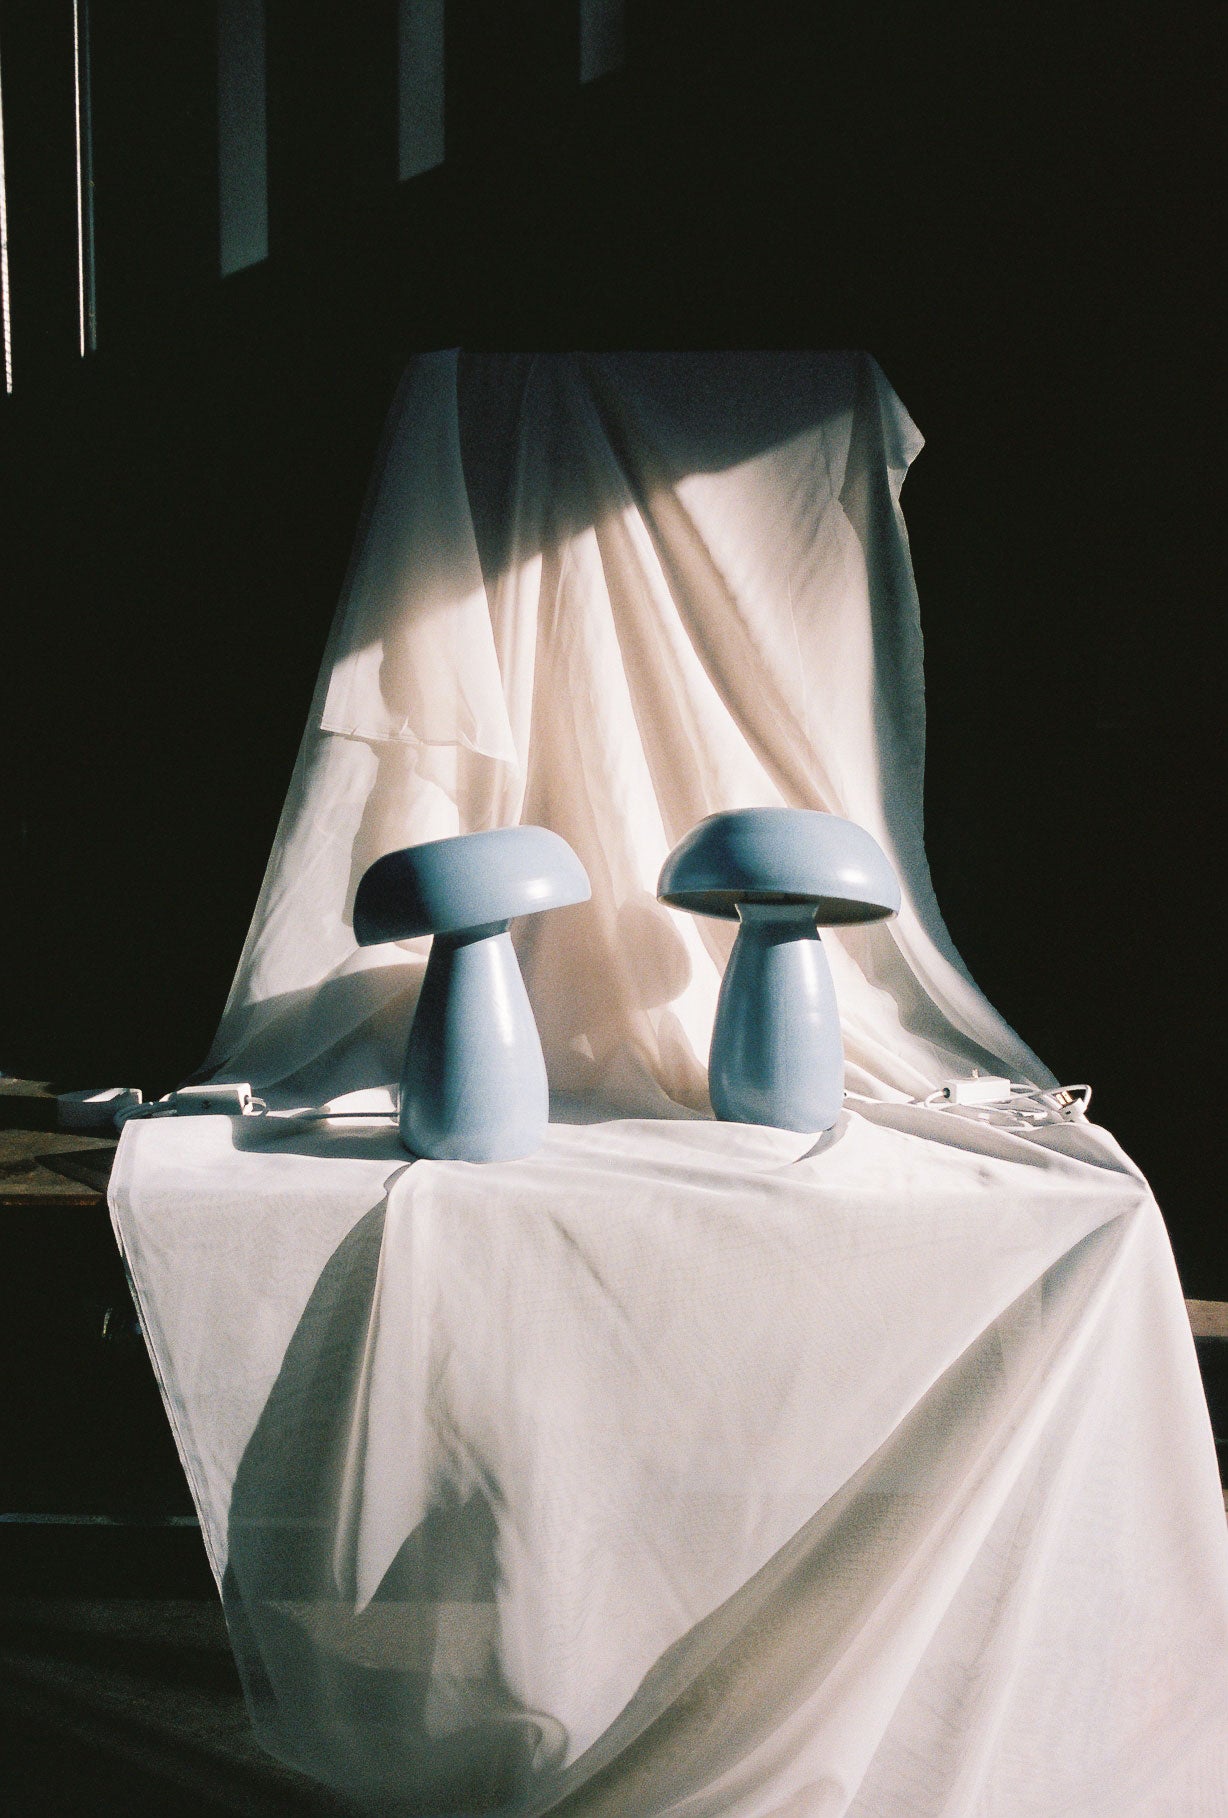 Two Stone Blue Mushroom Lamps shot resting on a sheer cloth